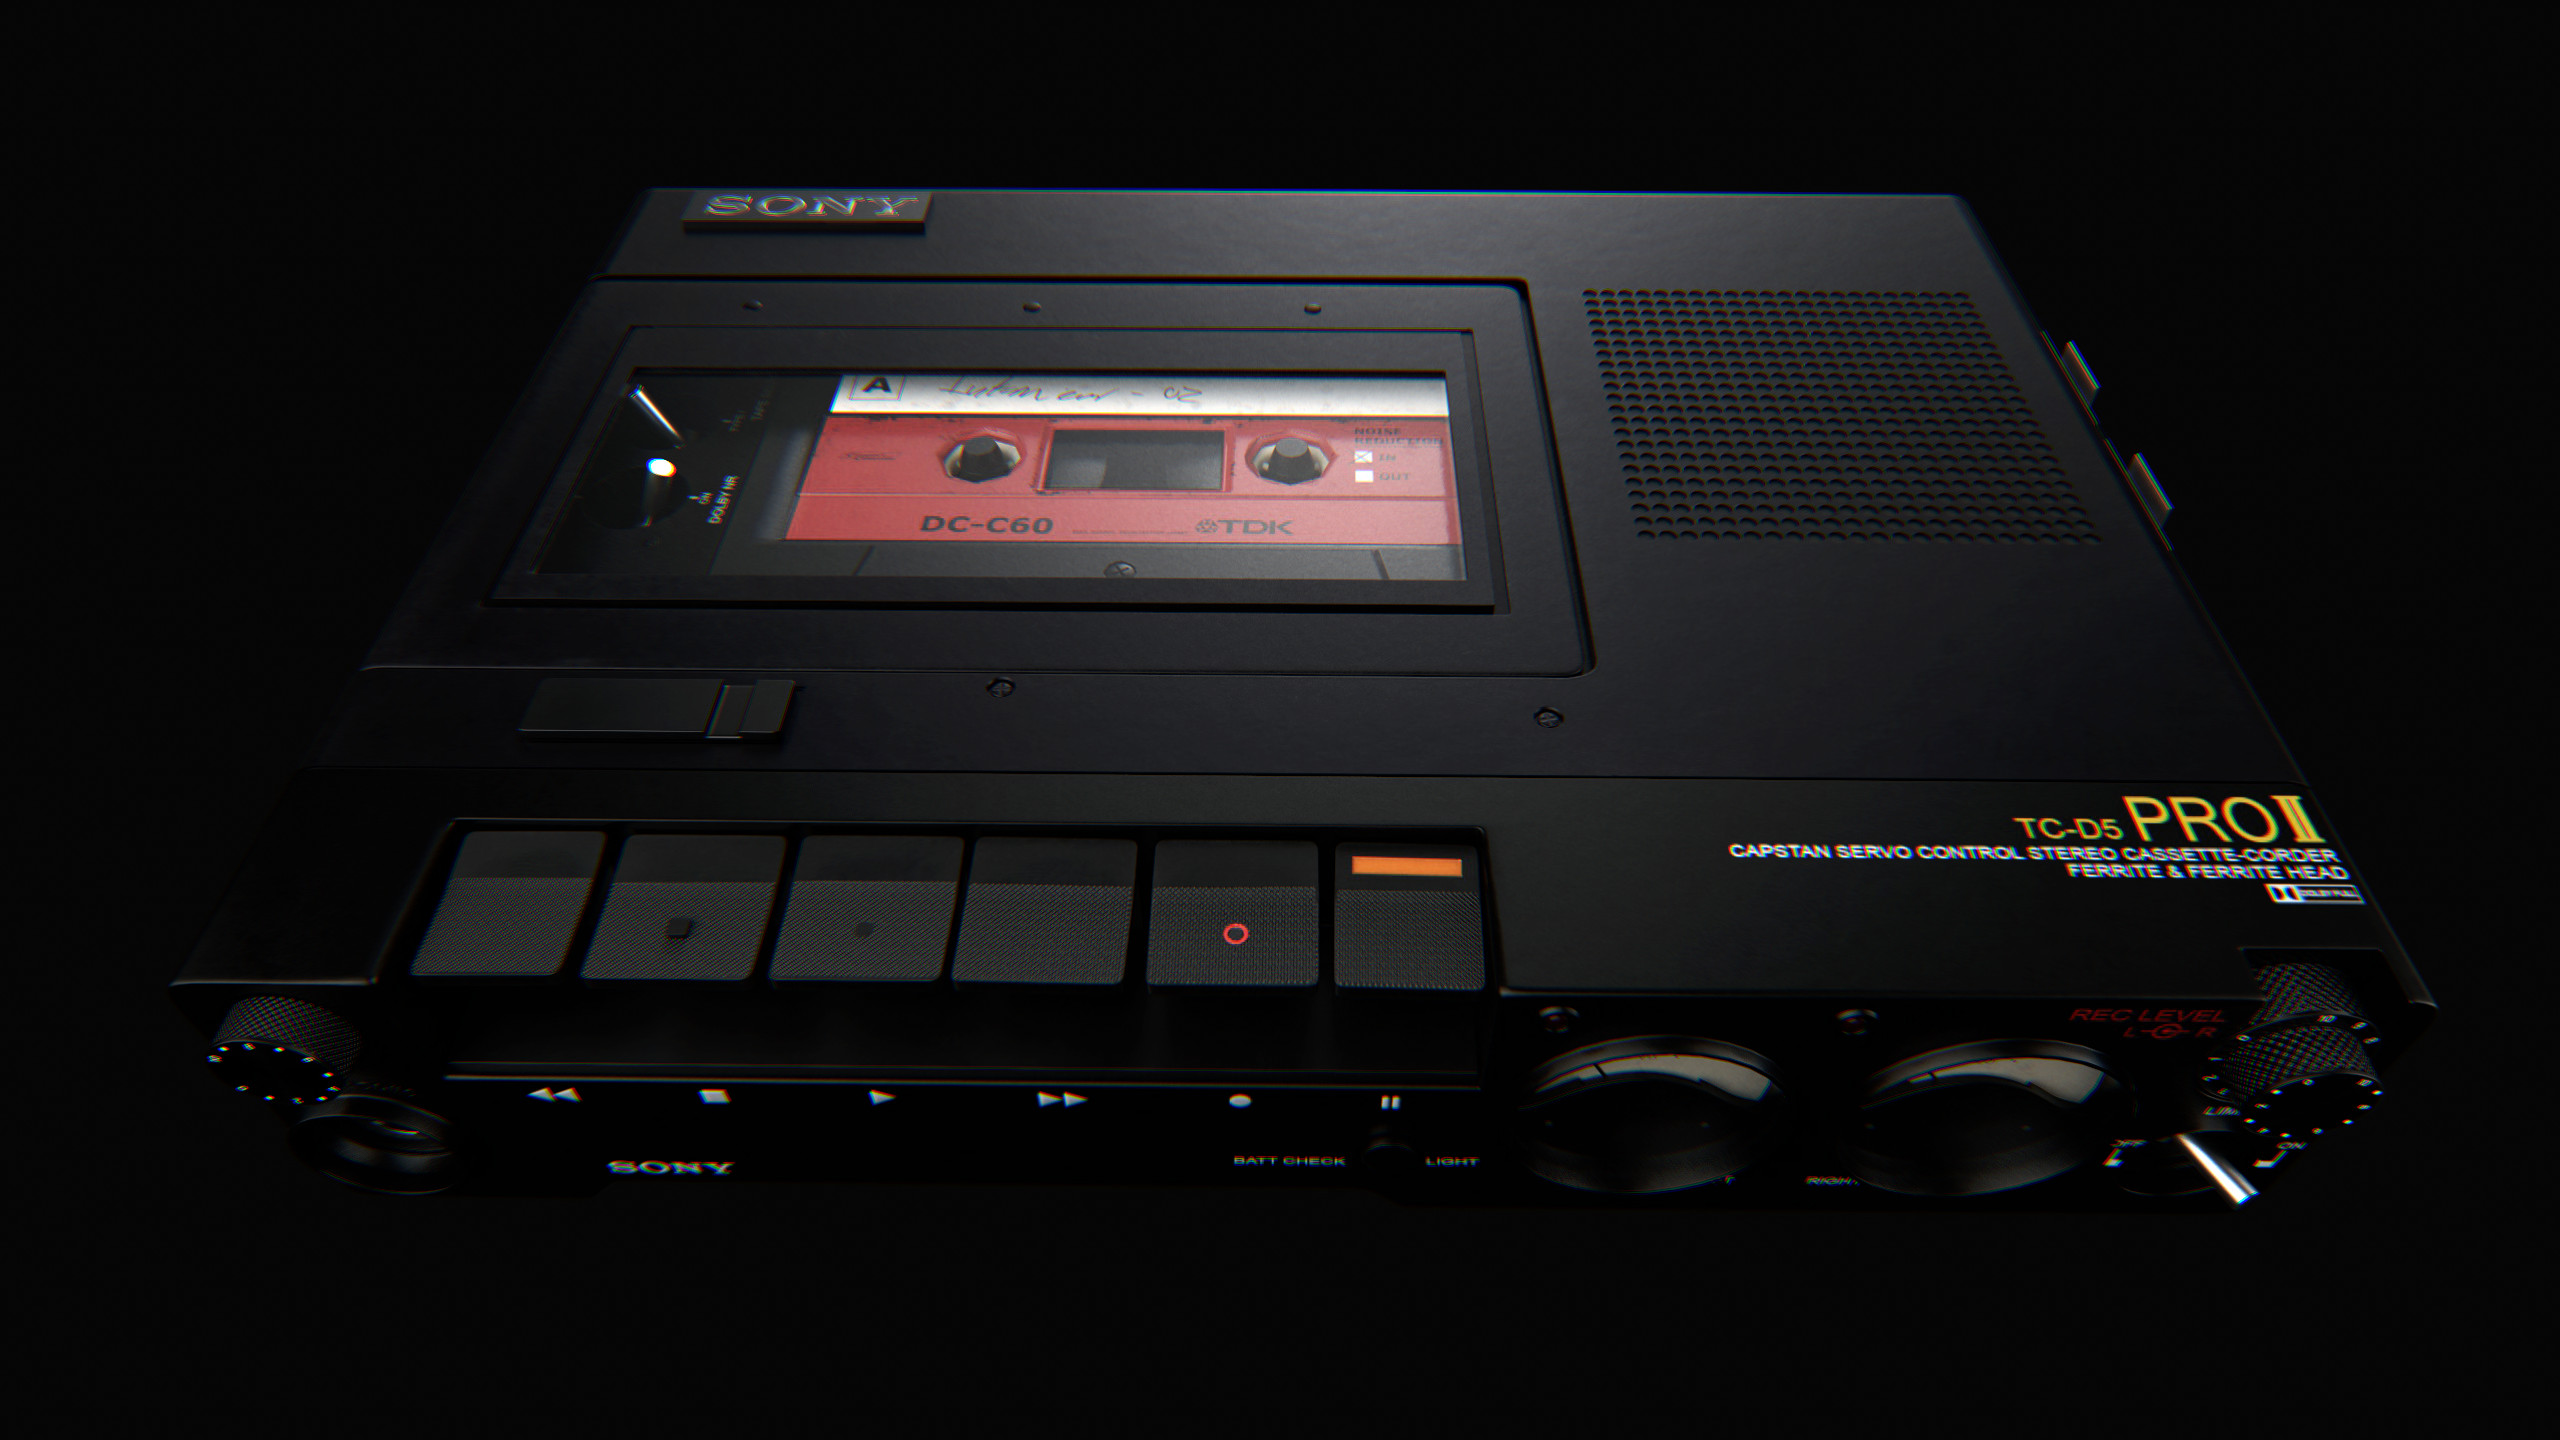 Better view of the cassette tape, created in collaboration with CG trader.com. Originally it was designed for use with procedural textures and required extensive modification and retexturing to get the final look.